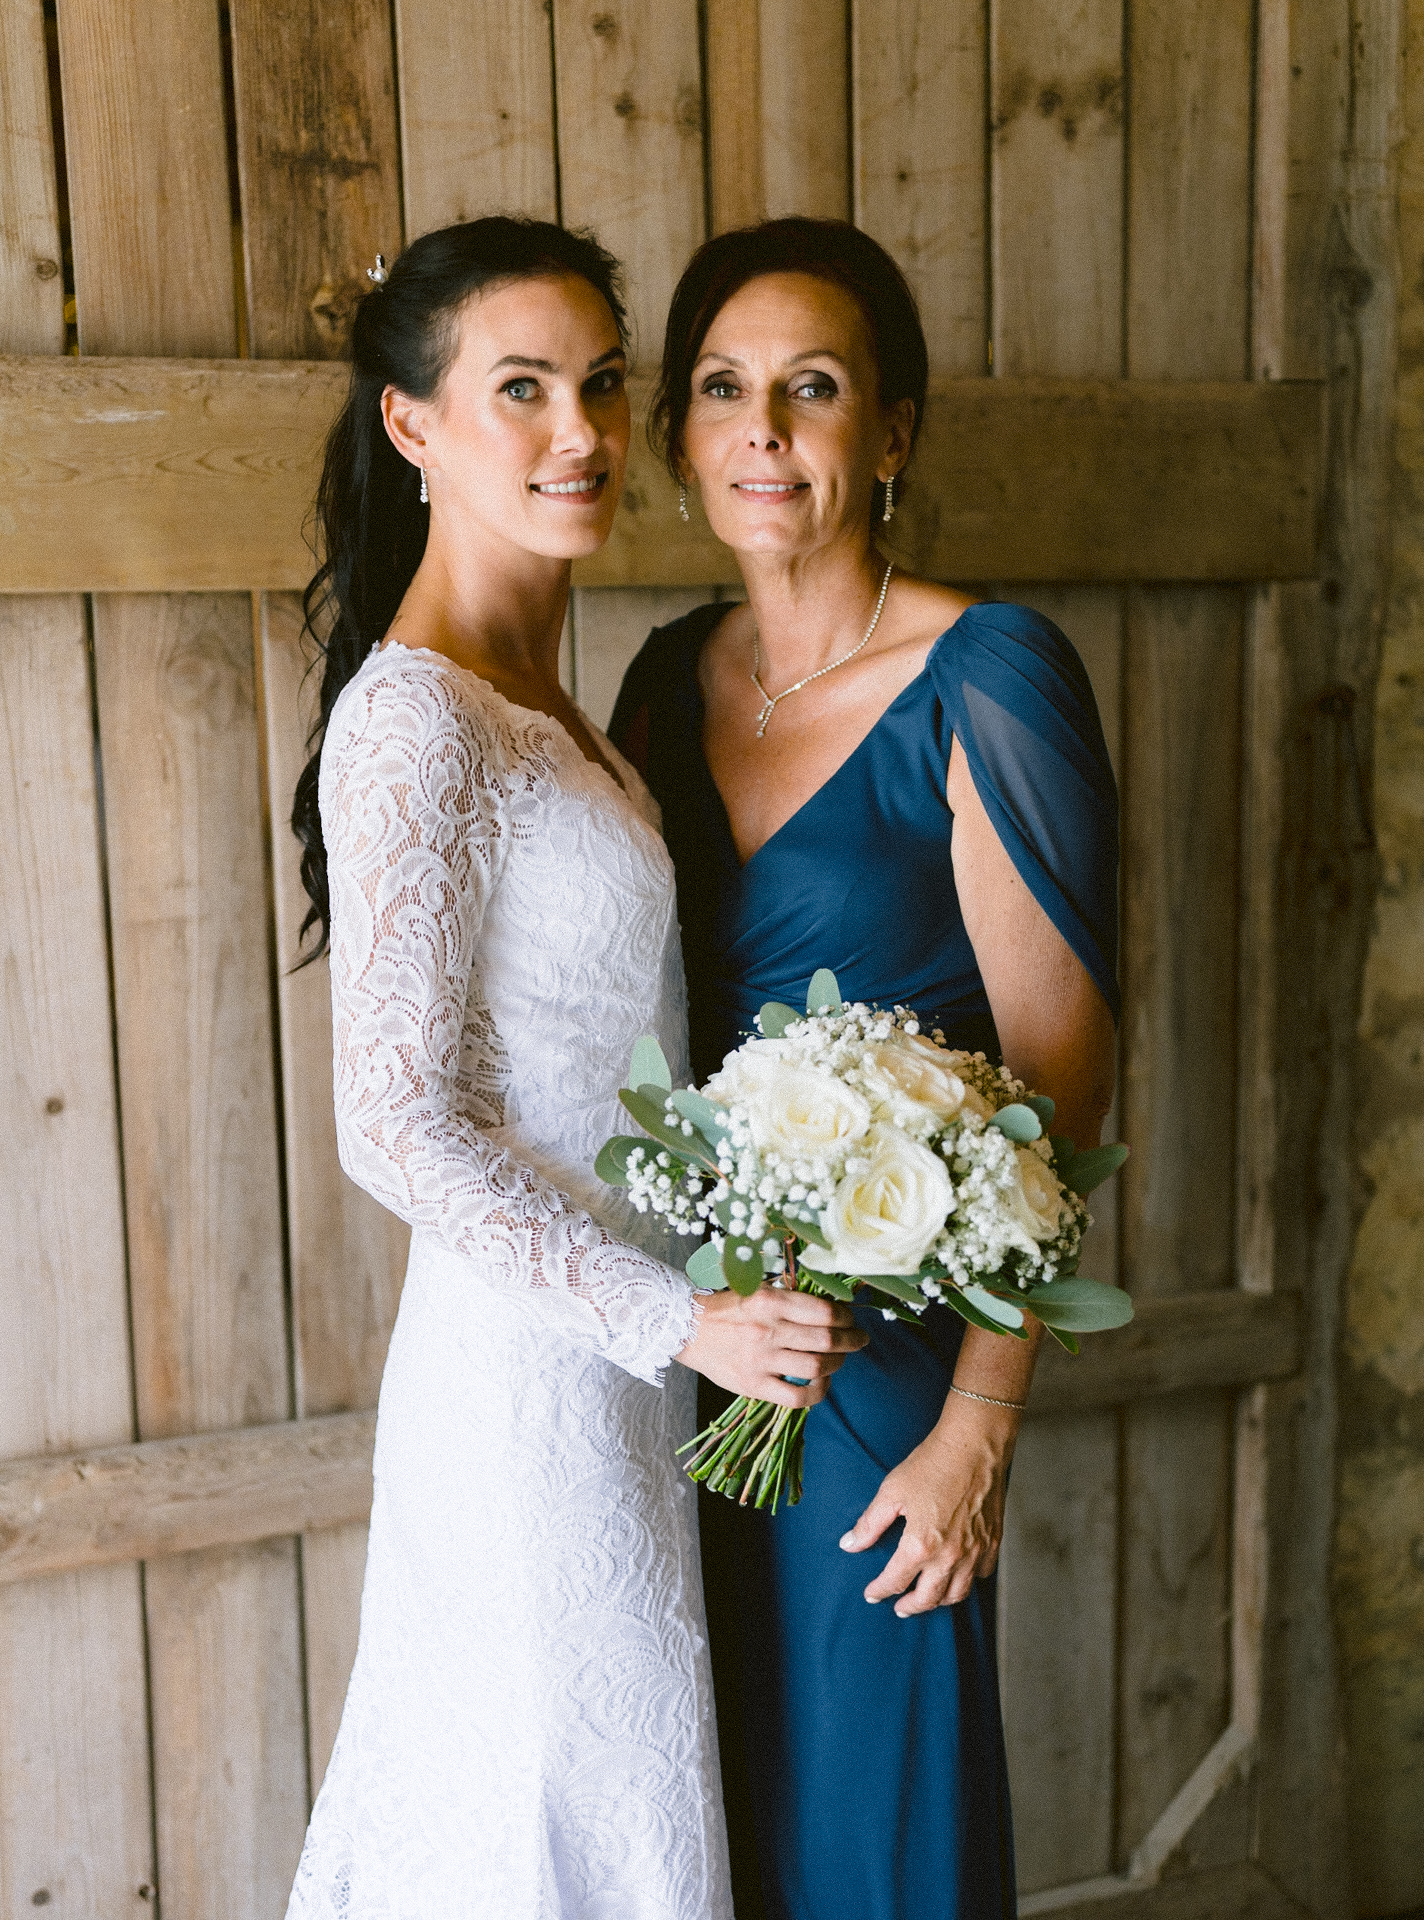 A bride in a white lace dress holding a bouquet stands next to her mother in a blue gown against a wooden backdrop.